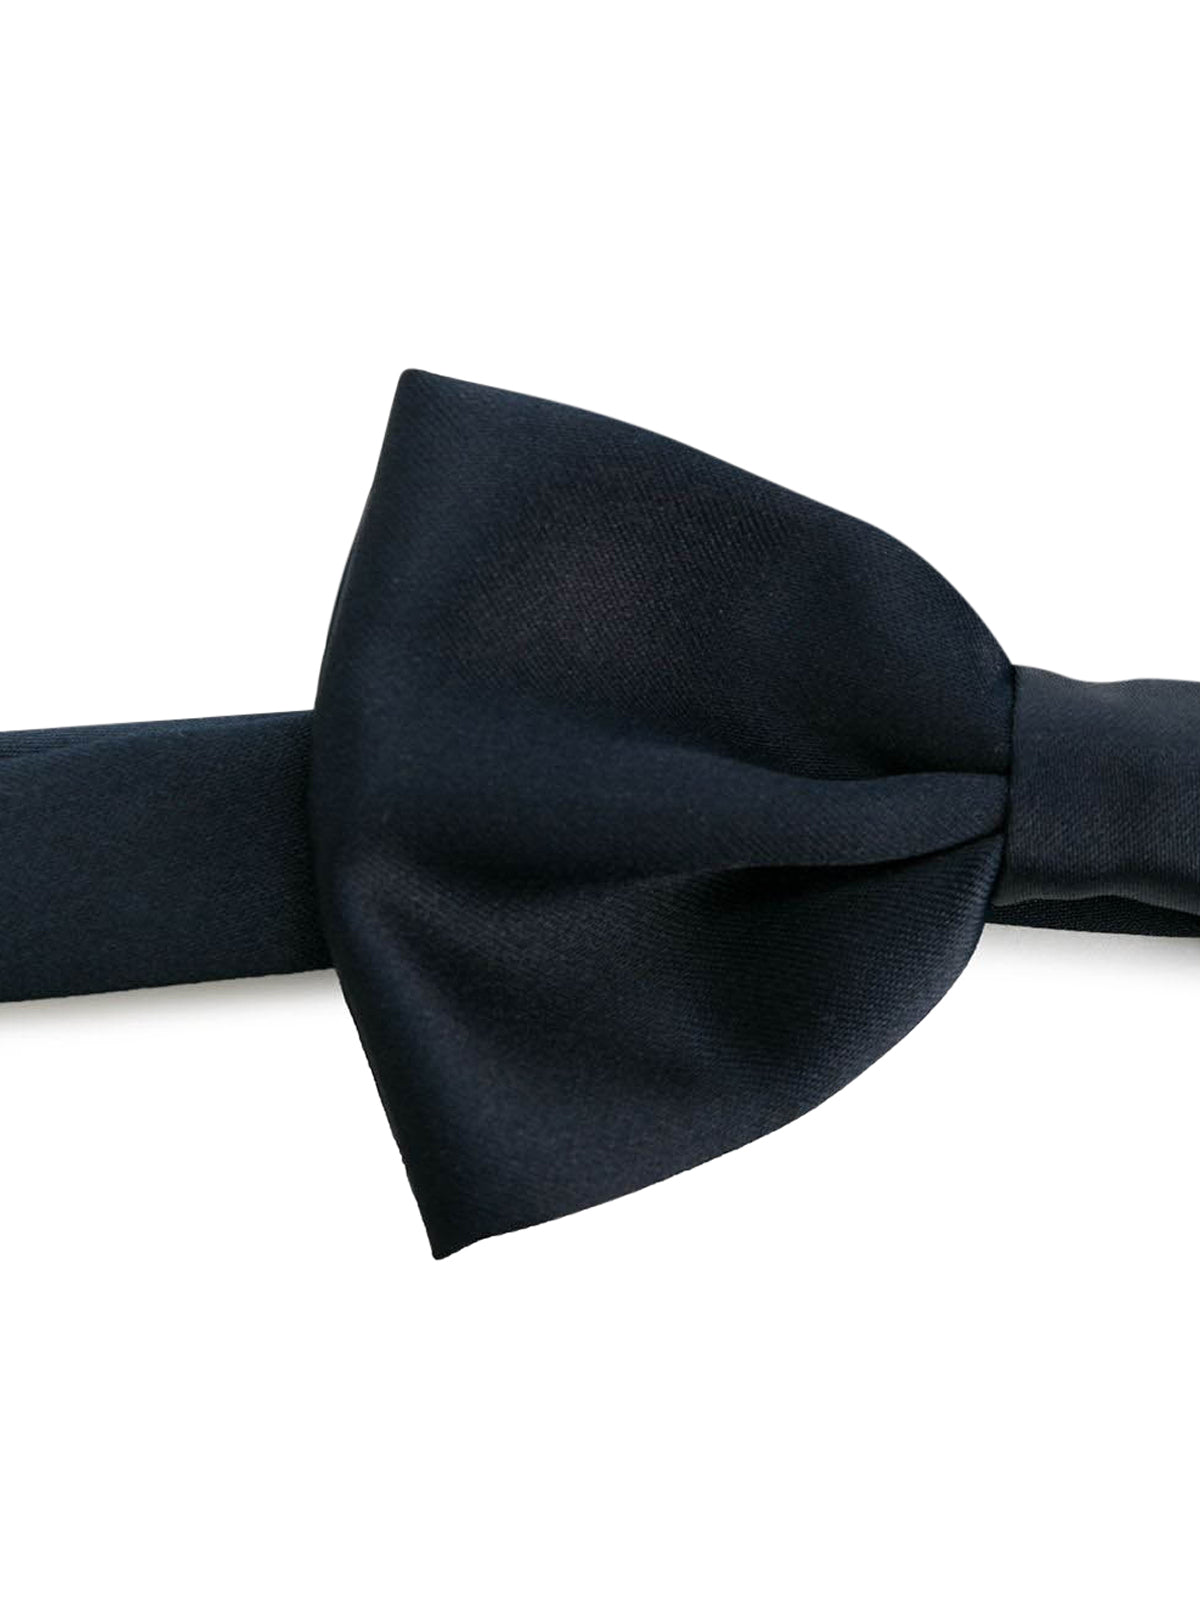 Classic blue bow tie